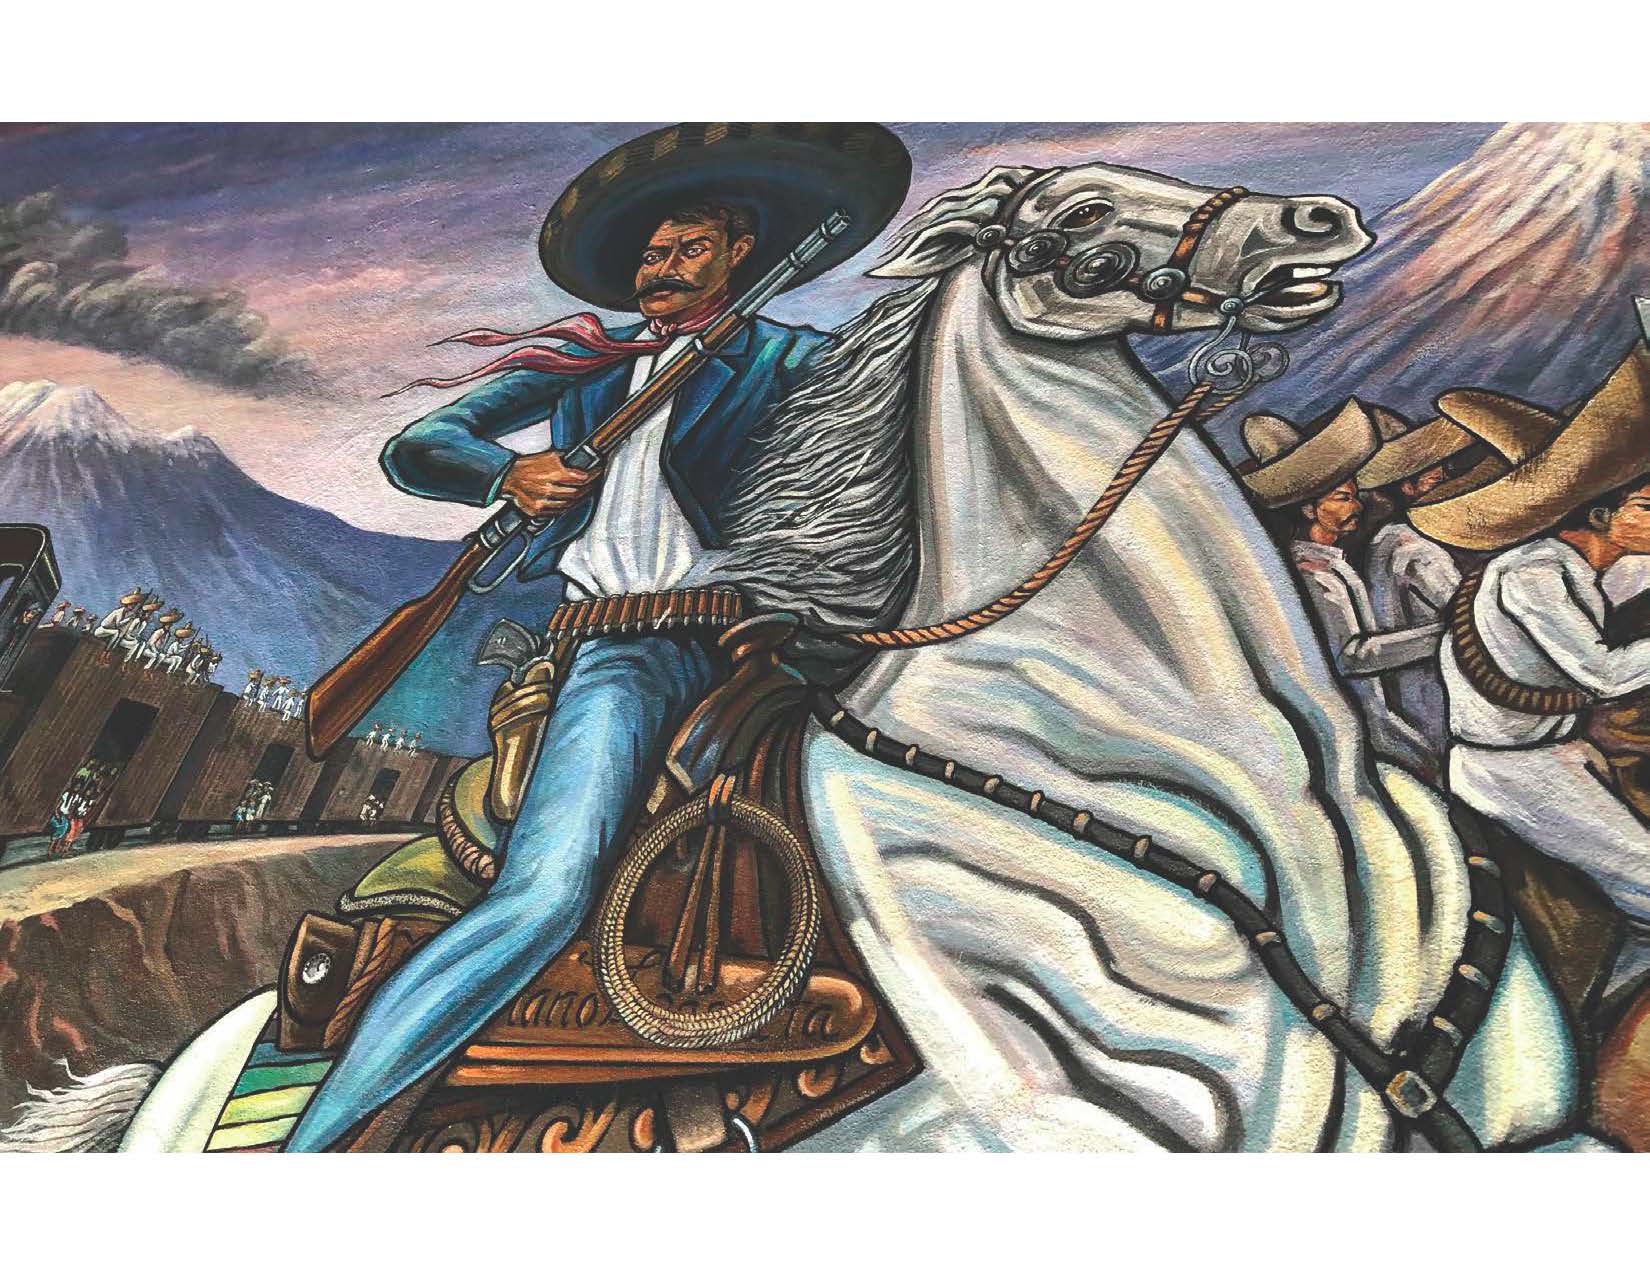 Illustration of Mexican revolutionary Emiliano Zapata. He is riding a horse and carrying a rifle.